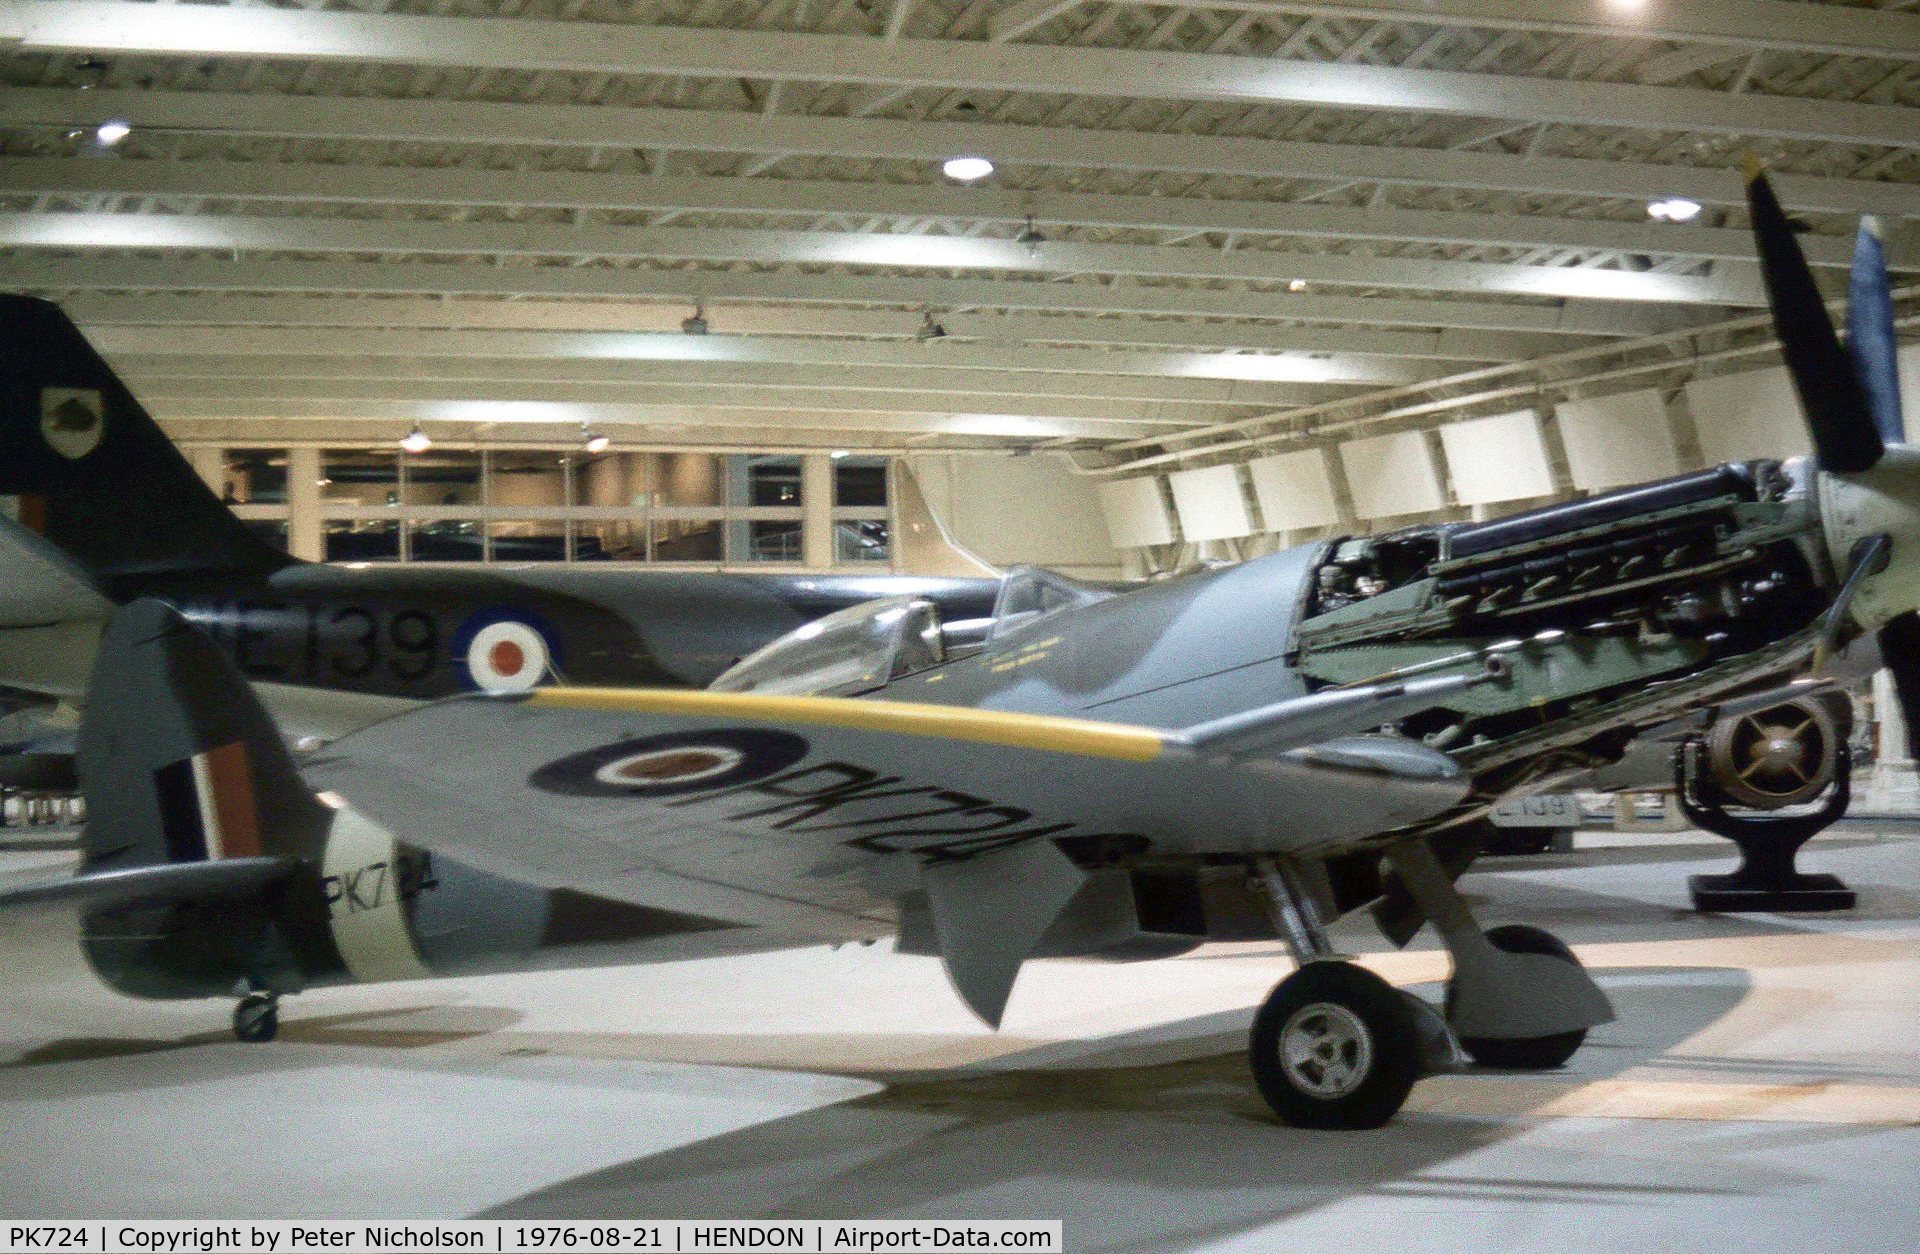 PK724, Supermarine 356 Spitfire F.24 C/N CBAF.255, The RAF Museum's Spitfire F.24 with maintenance serial 7288M as seen in 1976.